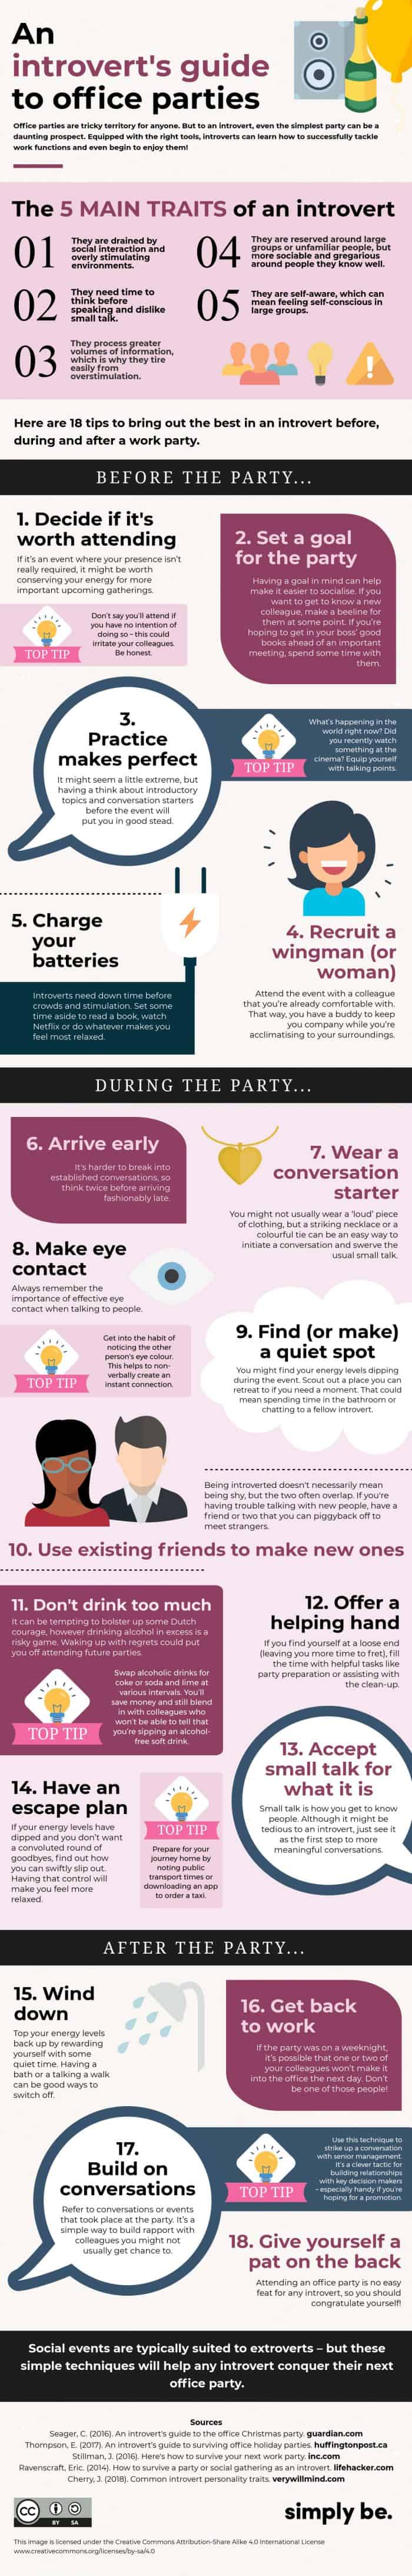 Introvert guide to office parties